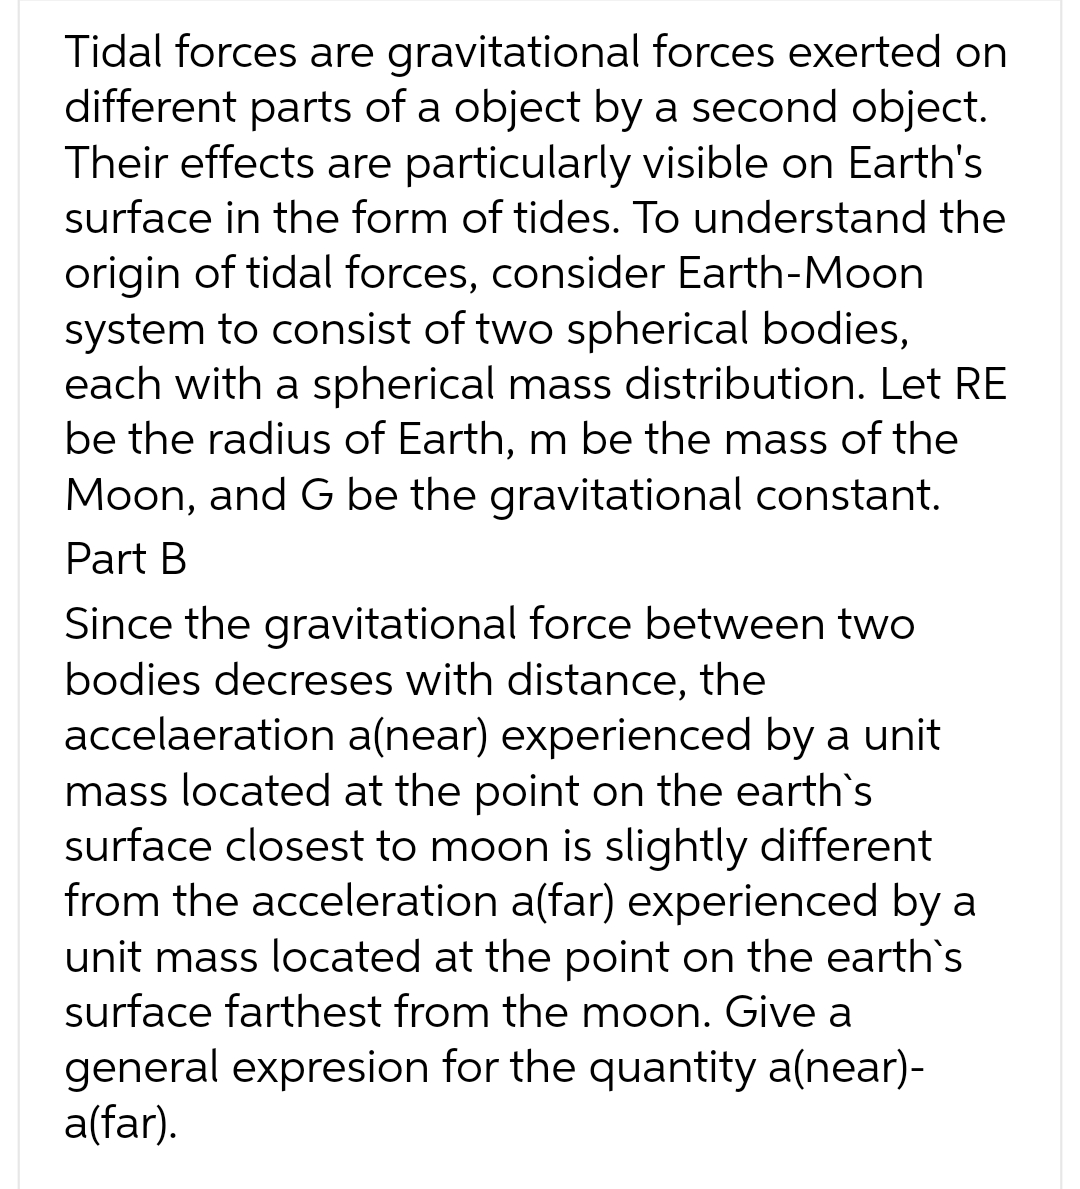 Tidal forces are gravitational forces exerted on
different parts of a object by a second object.
Their effects are particularly visible on Earth's
surface in the form of tides. To understand the
origin of tidal forces, consider Earth-Moon
system to consist of two spherical bodies,
each with a spherical mass distribution. Let RE
be the radius of Earth, m be the mass of the
Moon, and G be the gravitational constant.
Part B
Since the gravitational force between two
bodies decreses with distance, the
accelaeration a(near) experienced by a unit
mass located at the point on the earth's
surface closest to moon is slightly different
from the acceleration a(far) experienced by a
unit mass located at the point on the earth`s
surface farthest from the moon. Give a
general expresion for the quantity a(near)-
a(far).